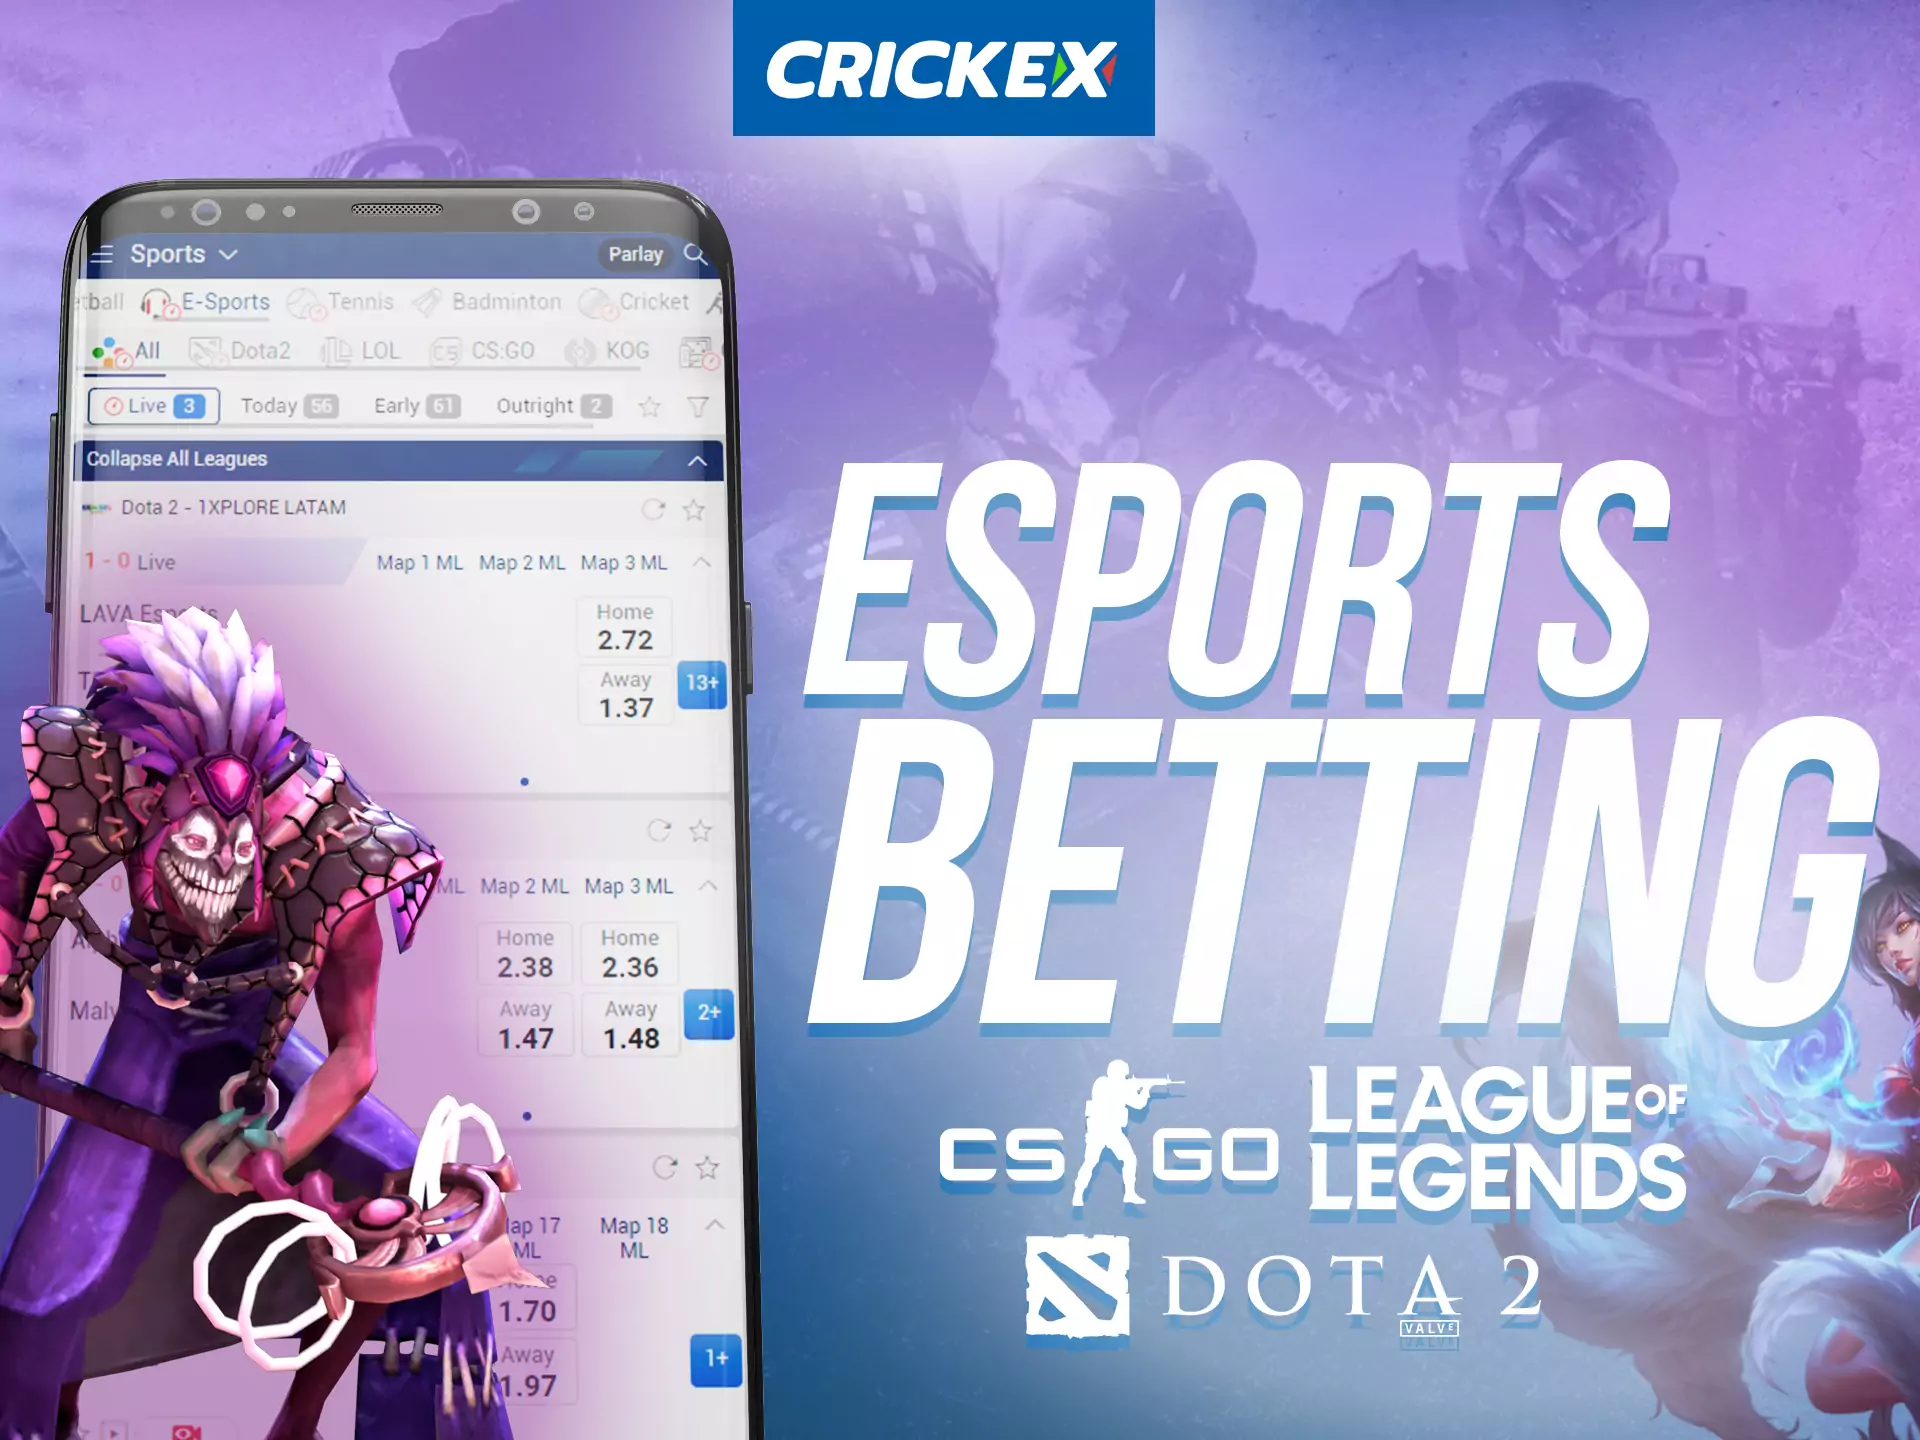 With the Crickex app, try betting on esport.